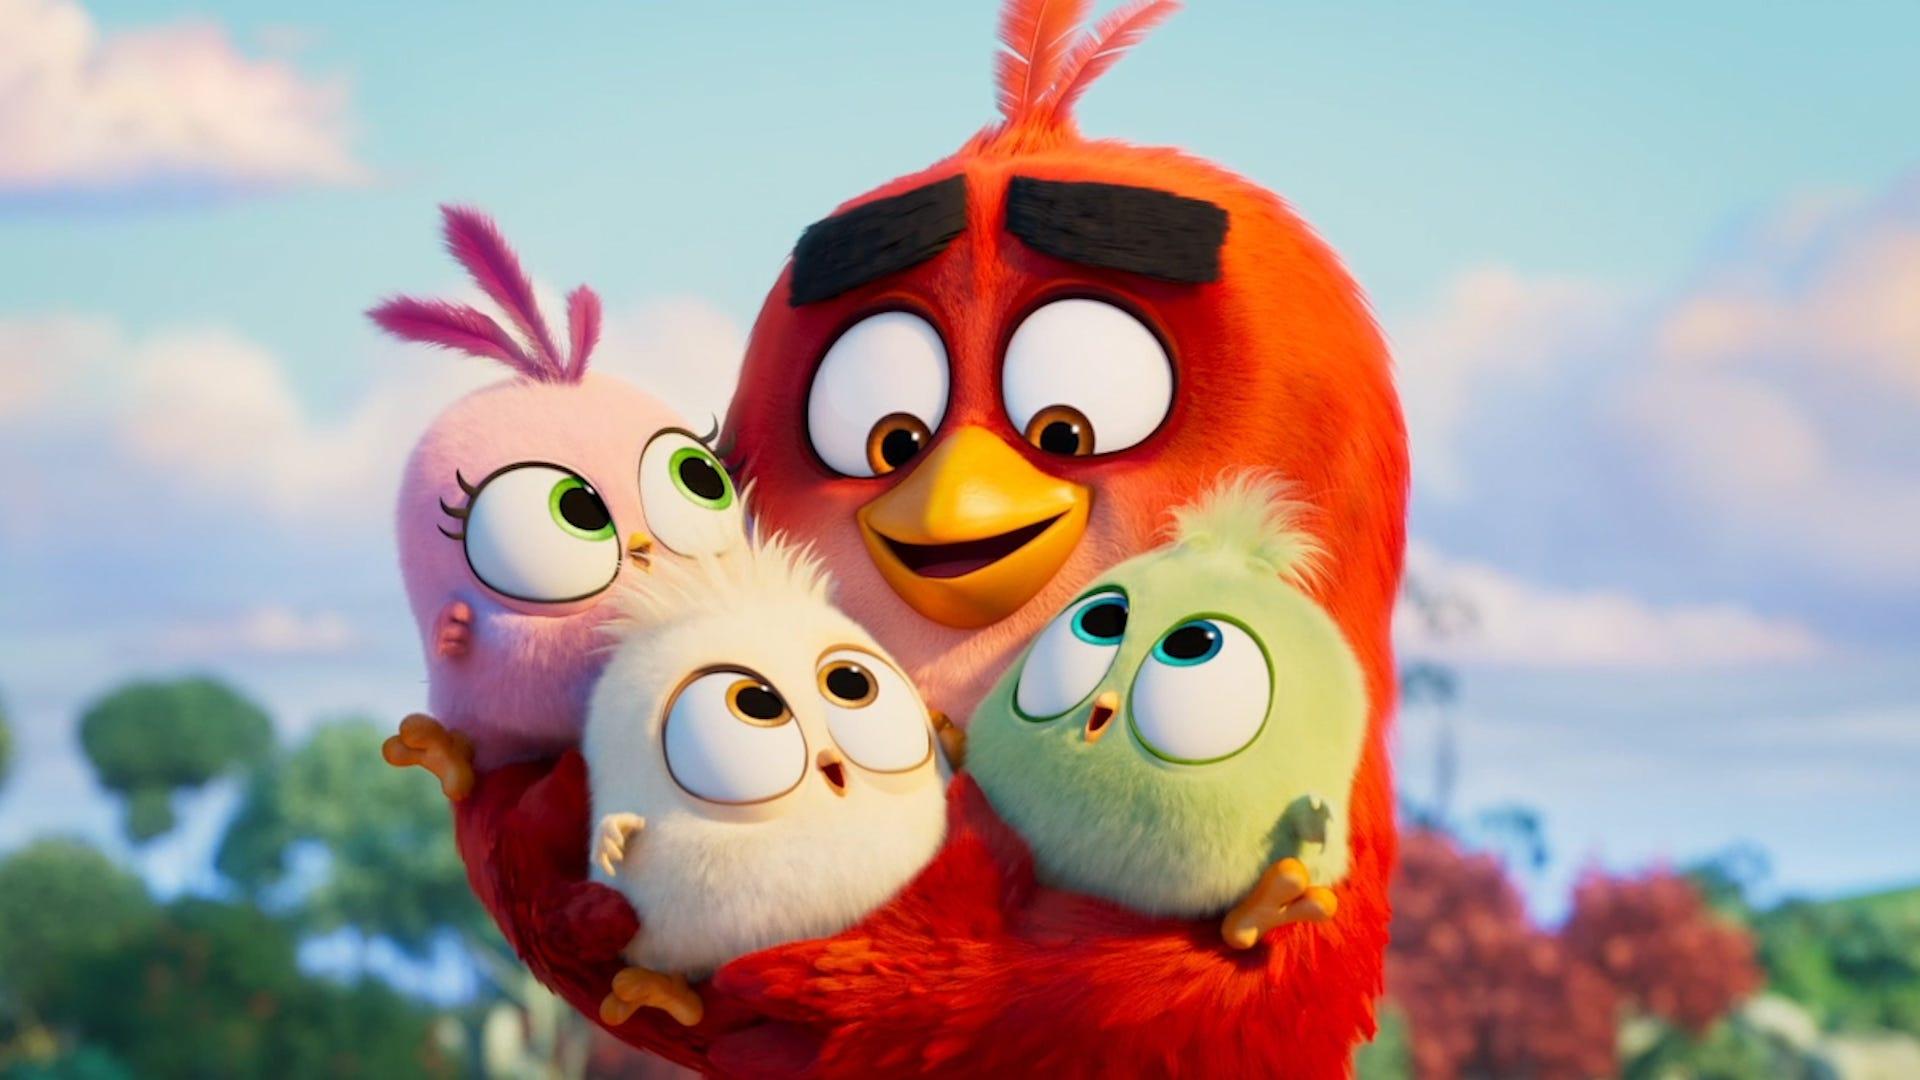 The birds and pigs make an unlikely team in 'Angry Birds Movie 2' trailer